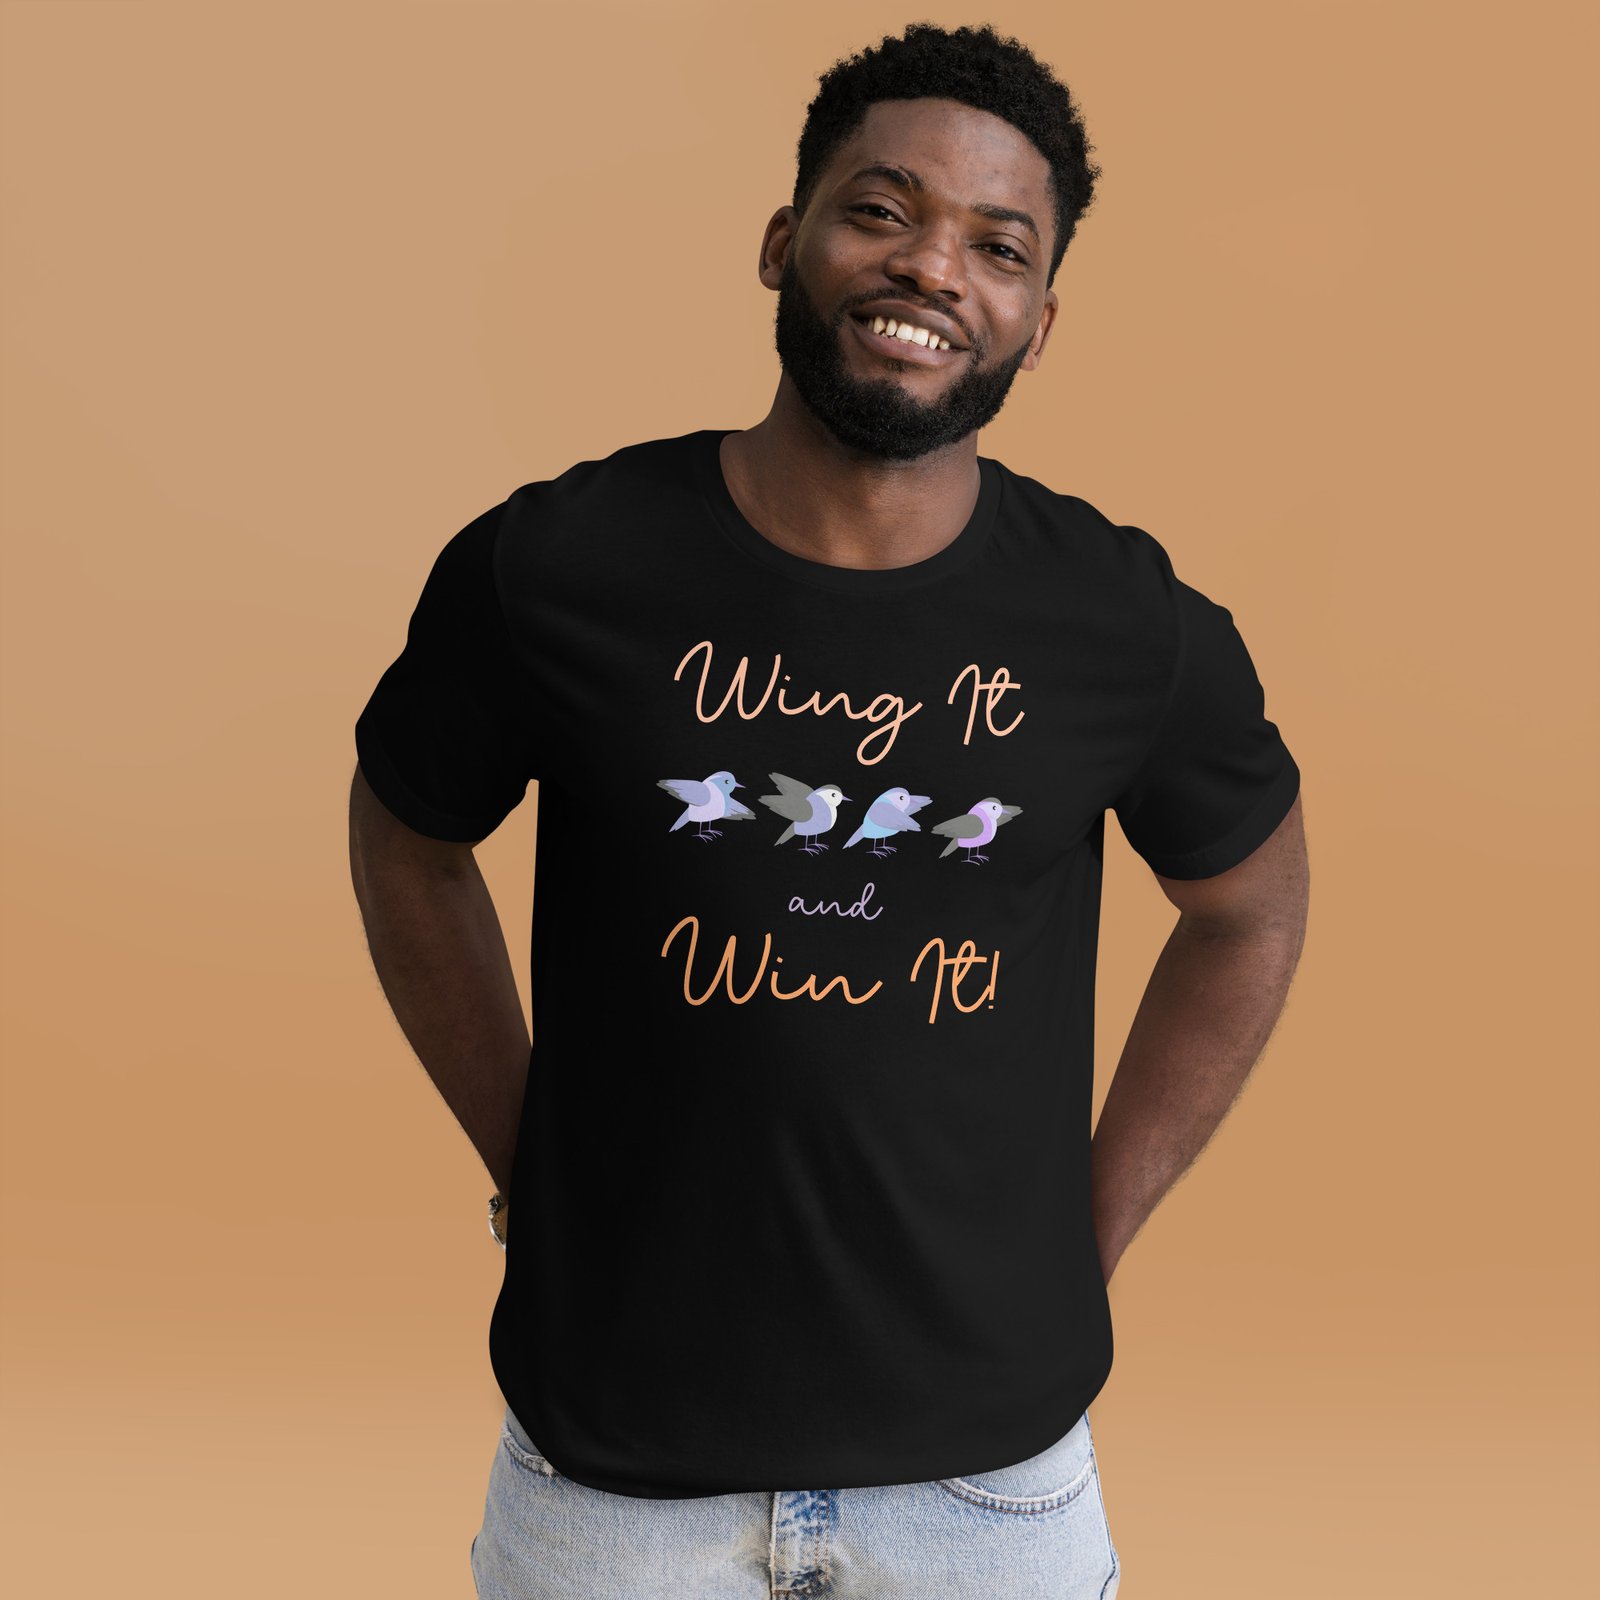 Wing it and Win it T-shirt: Embrace Life's Challenges